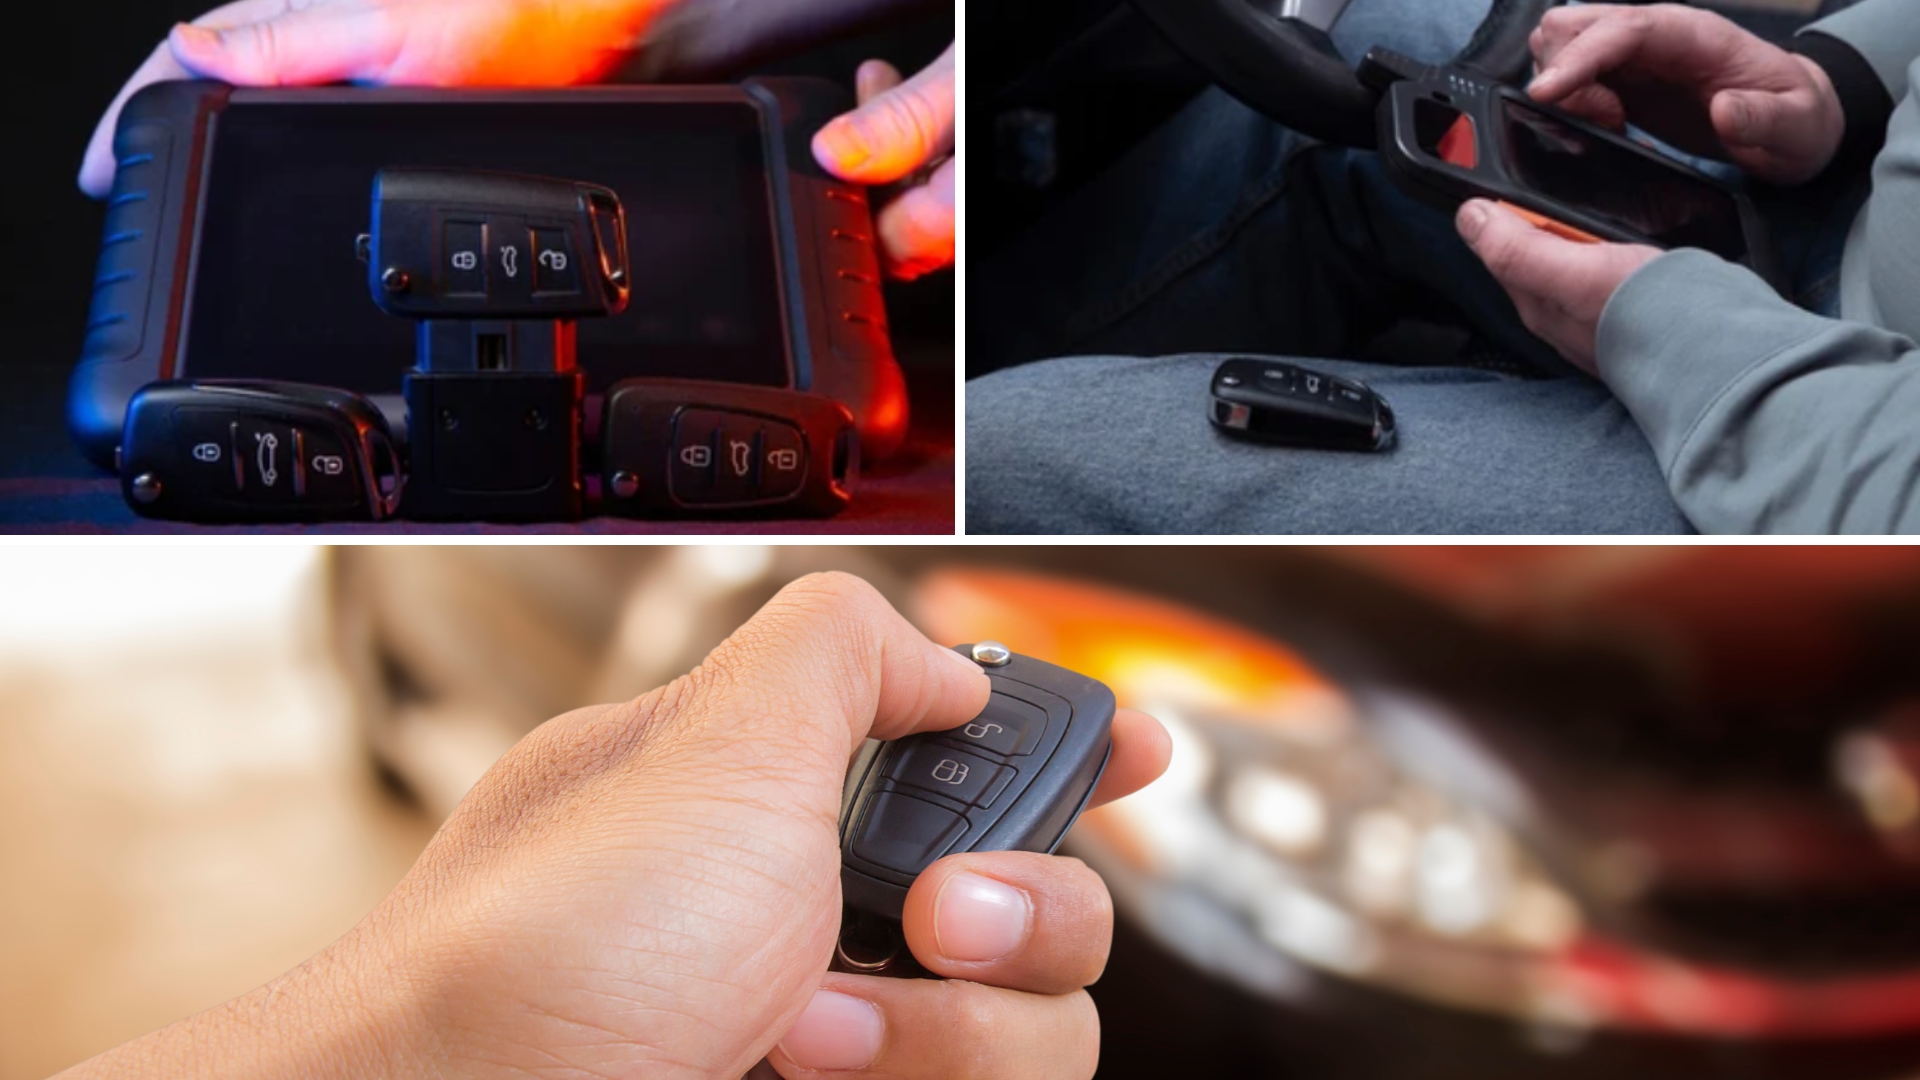 Several steps on how a locksmith performs car key programming